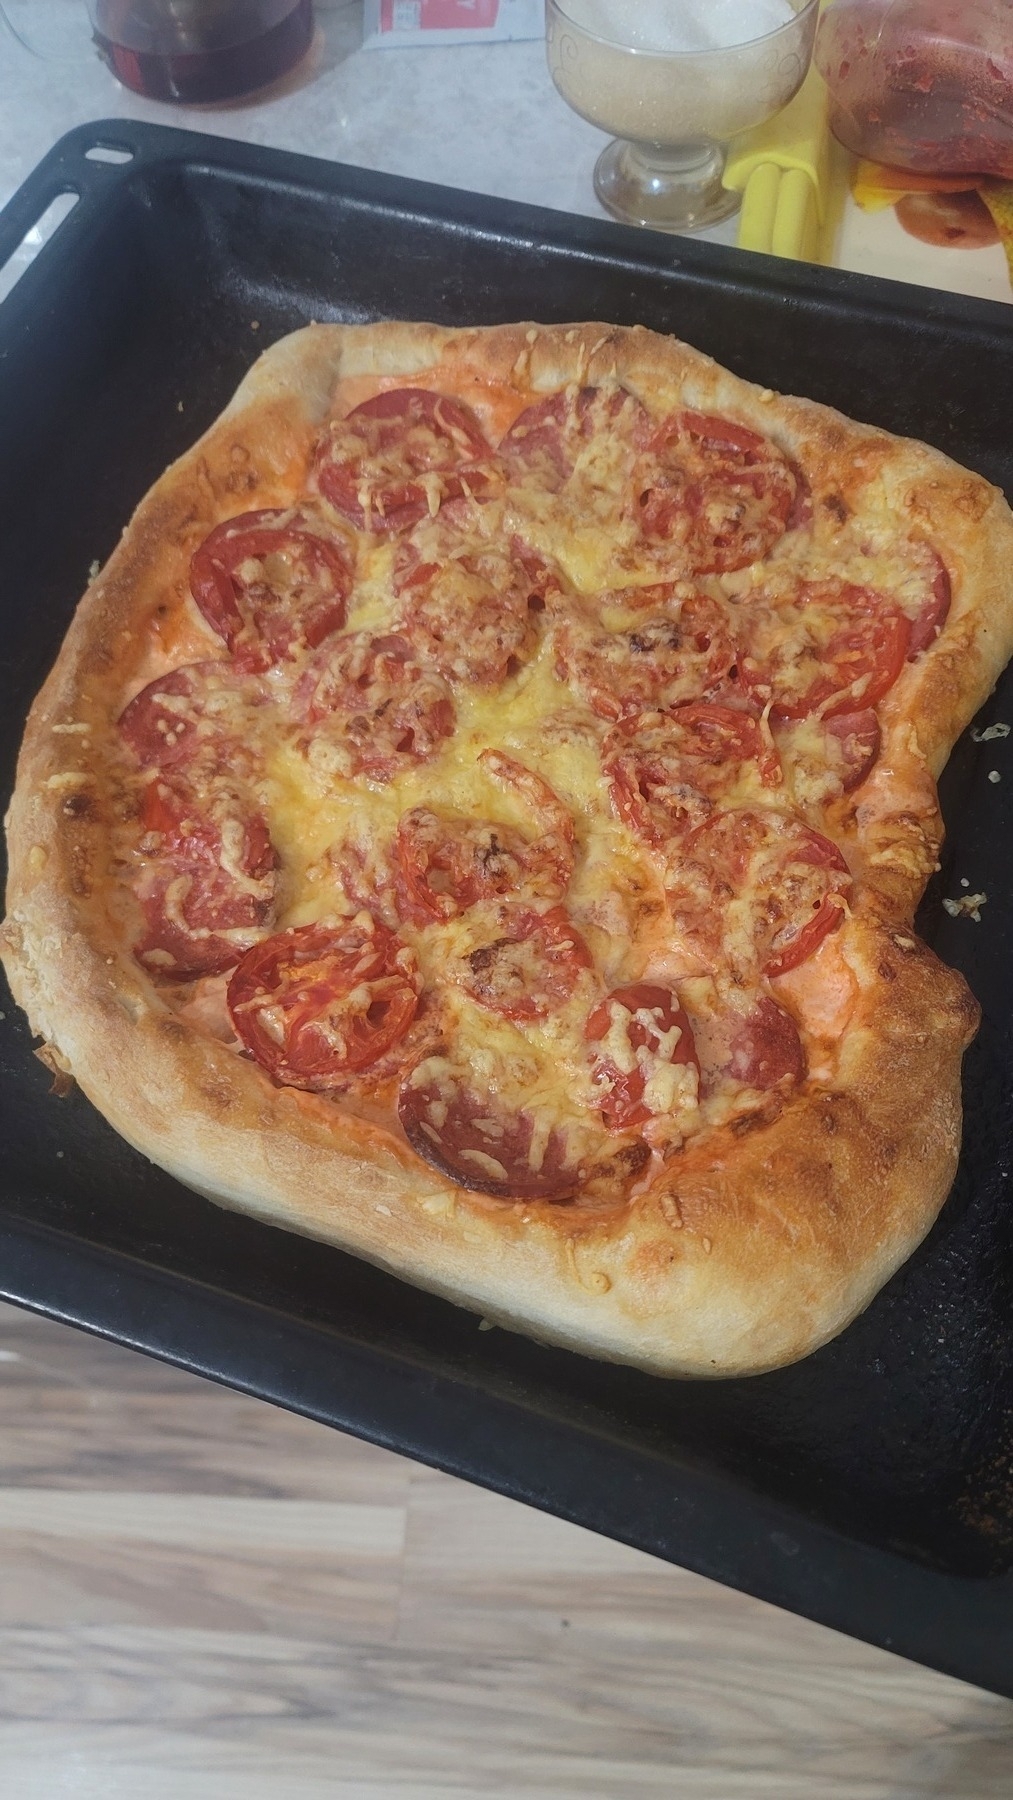 freshly baked pizza with tomatoes, sausage and cheese on an oven shelf